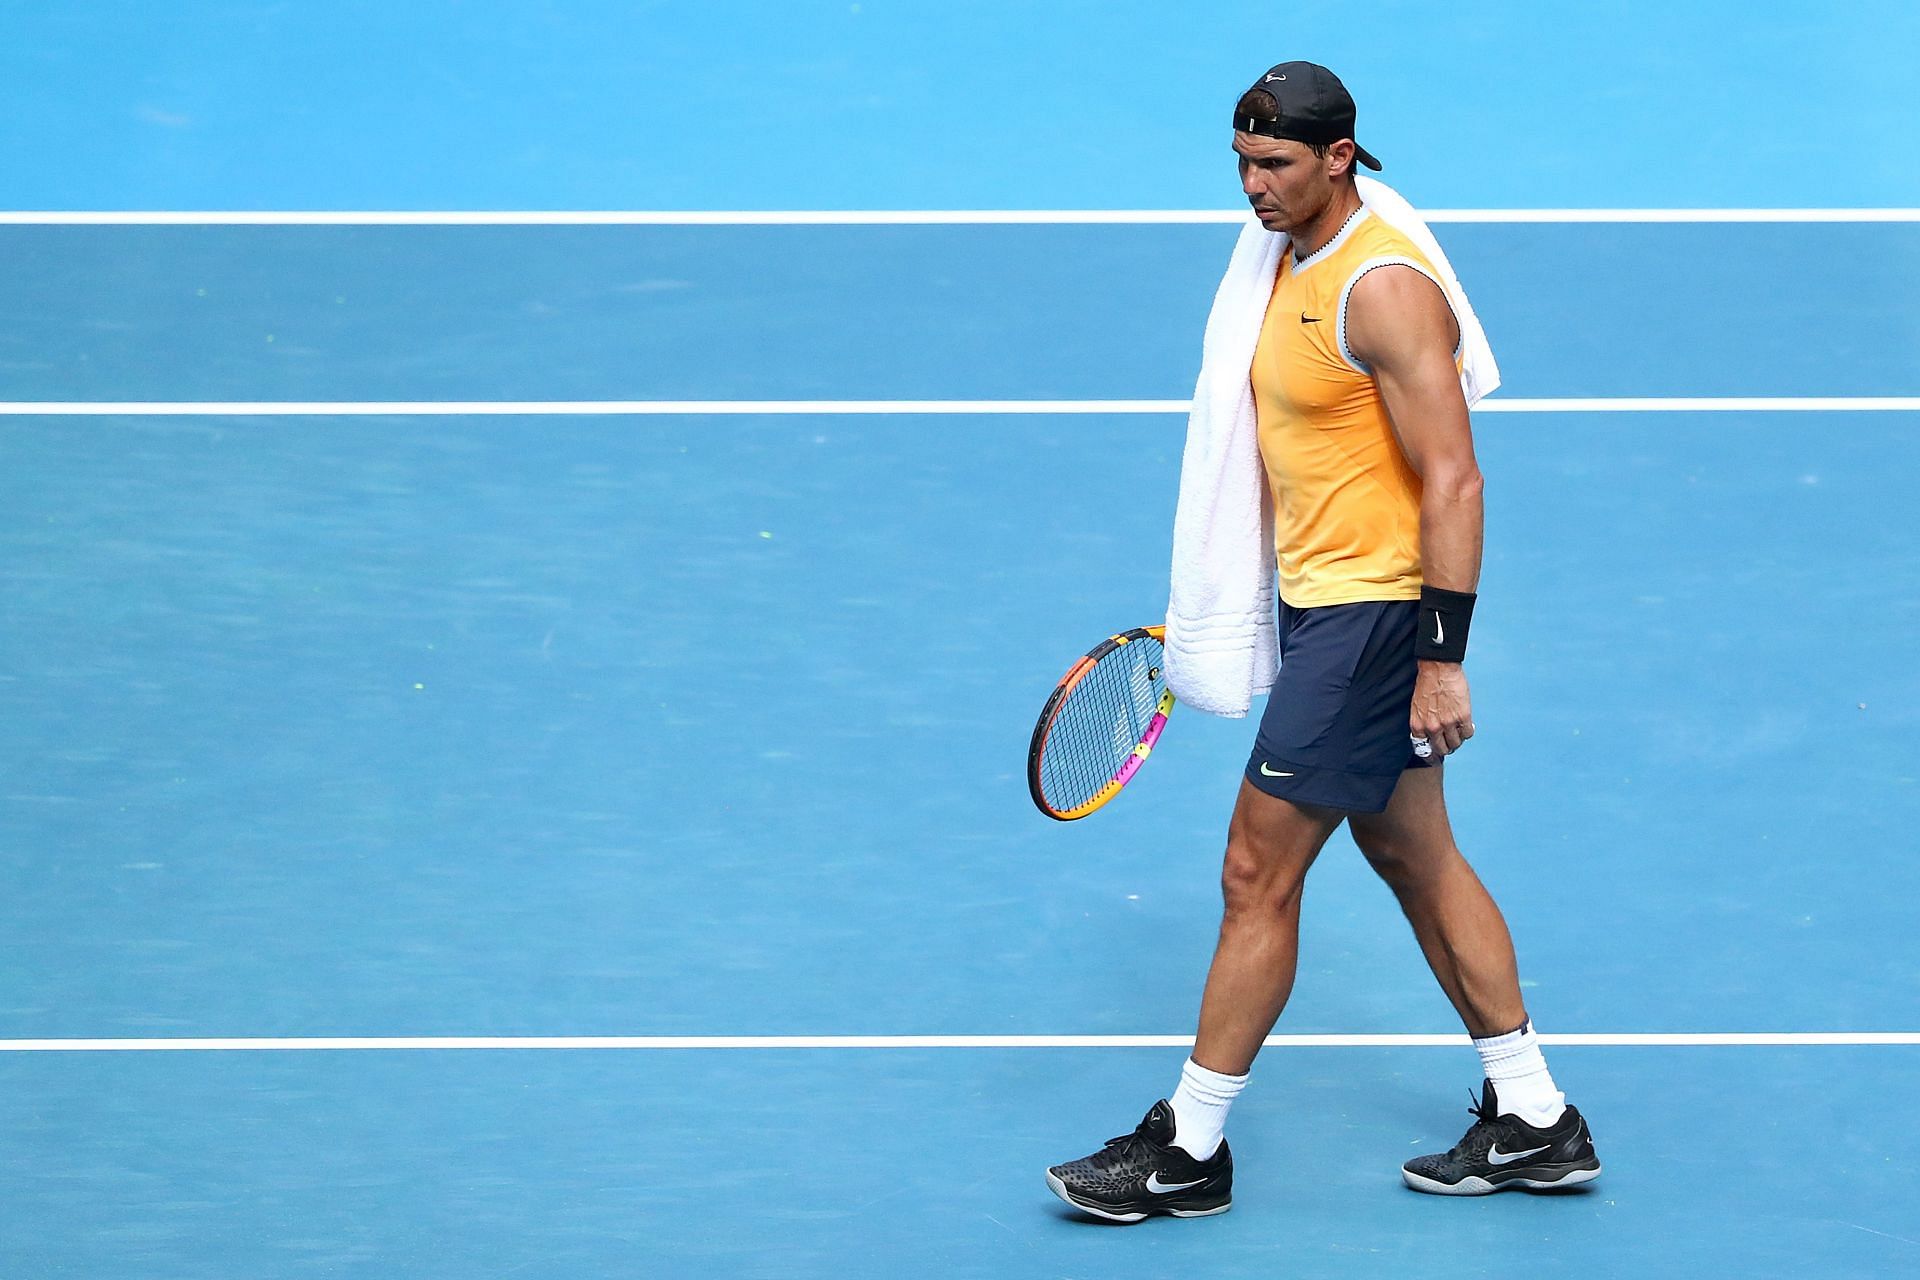 Rafael Nadal practices at the Rod Laver Arena ahead of the 2022 Australian Open